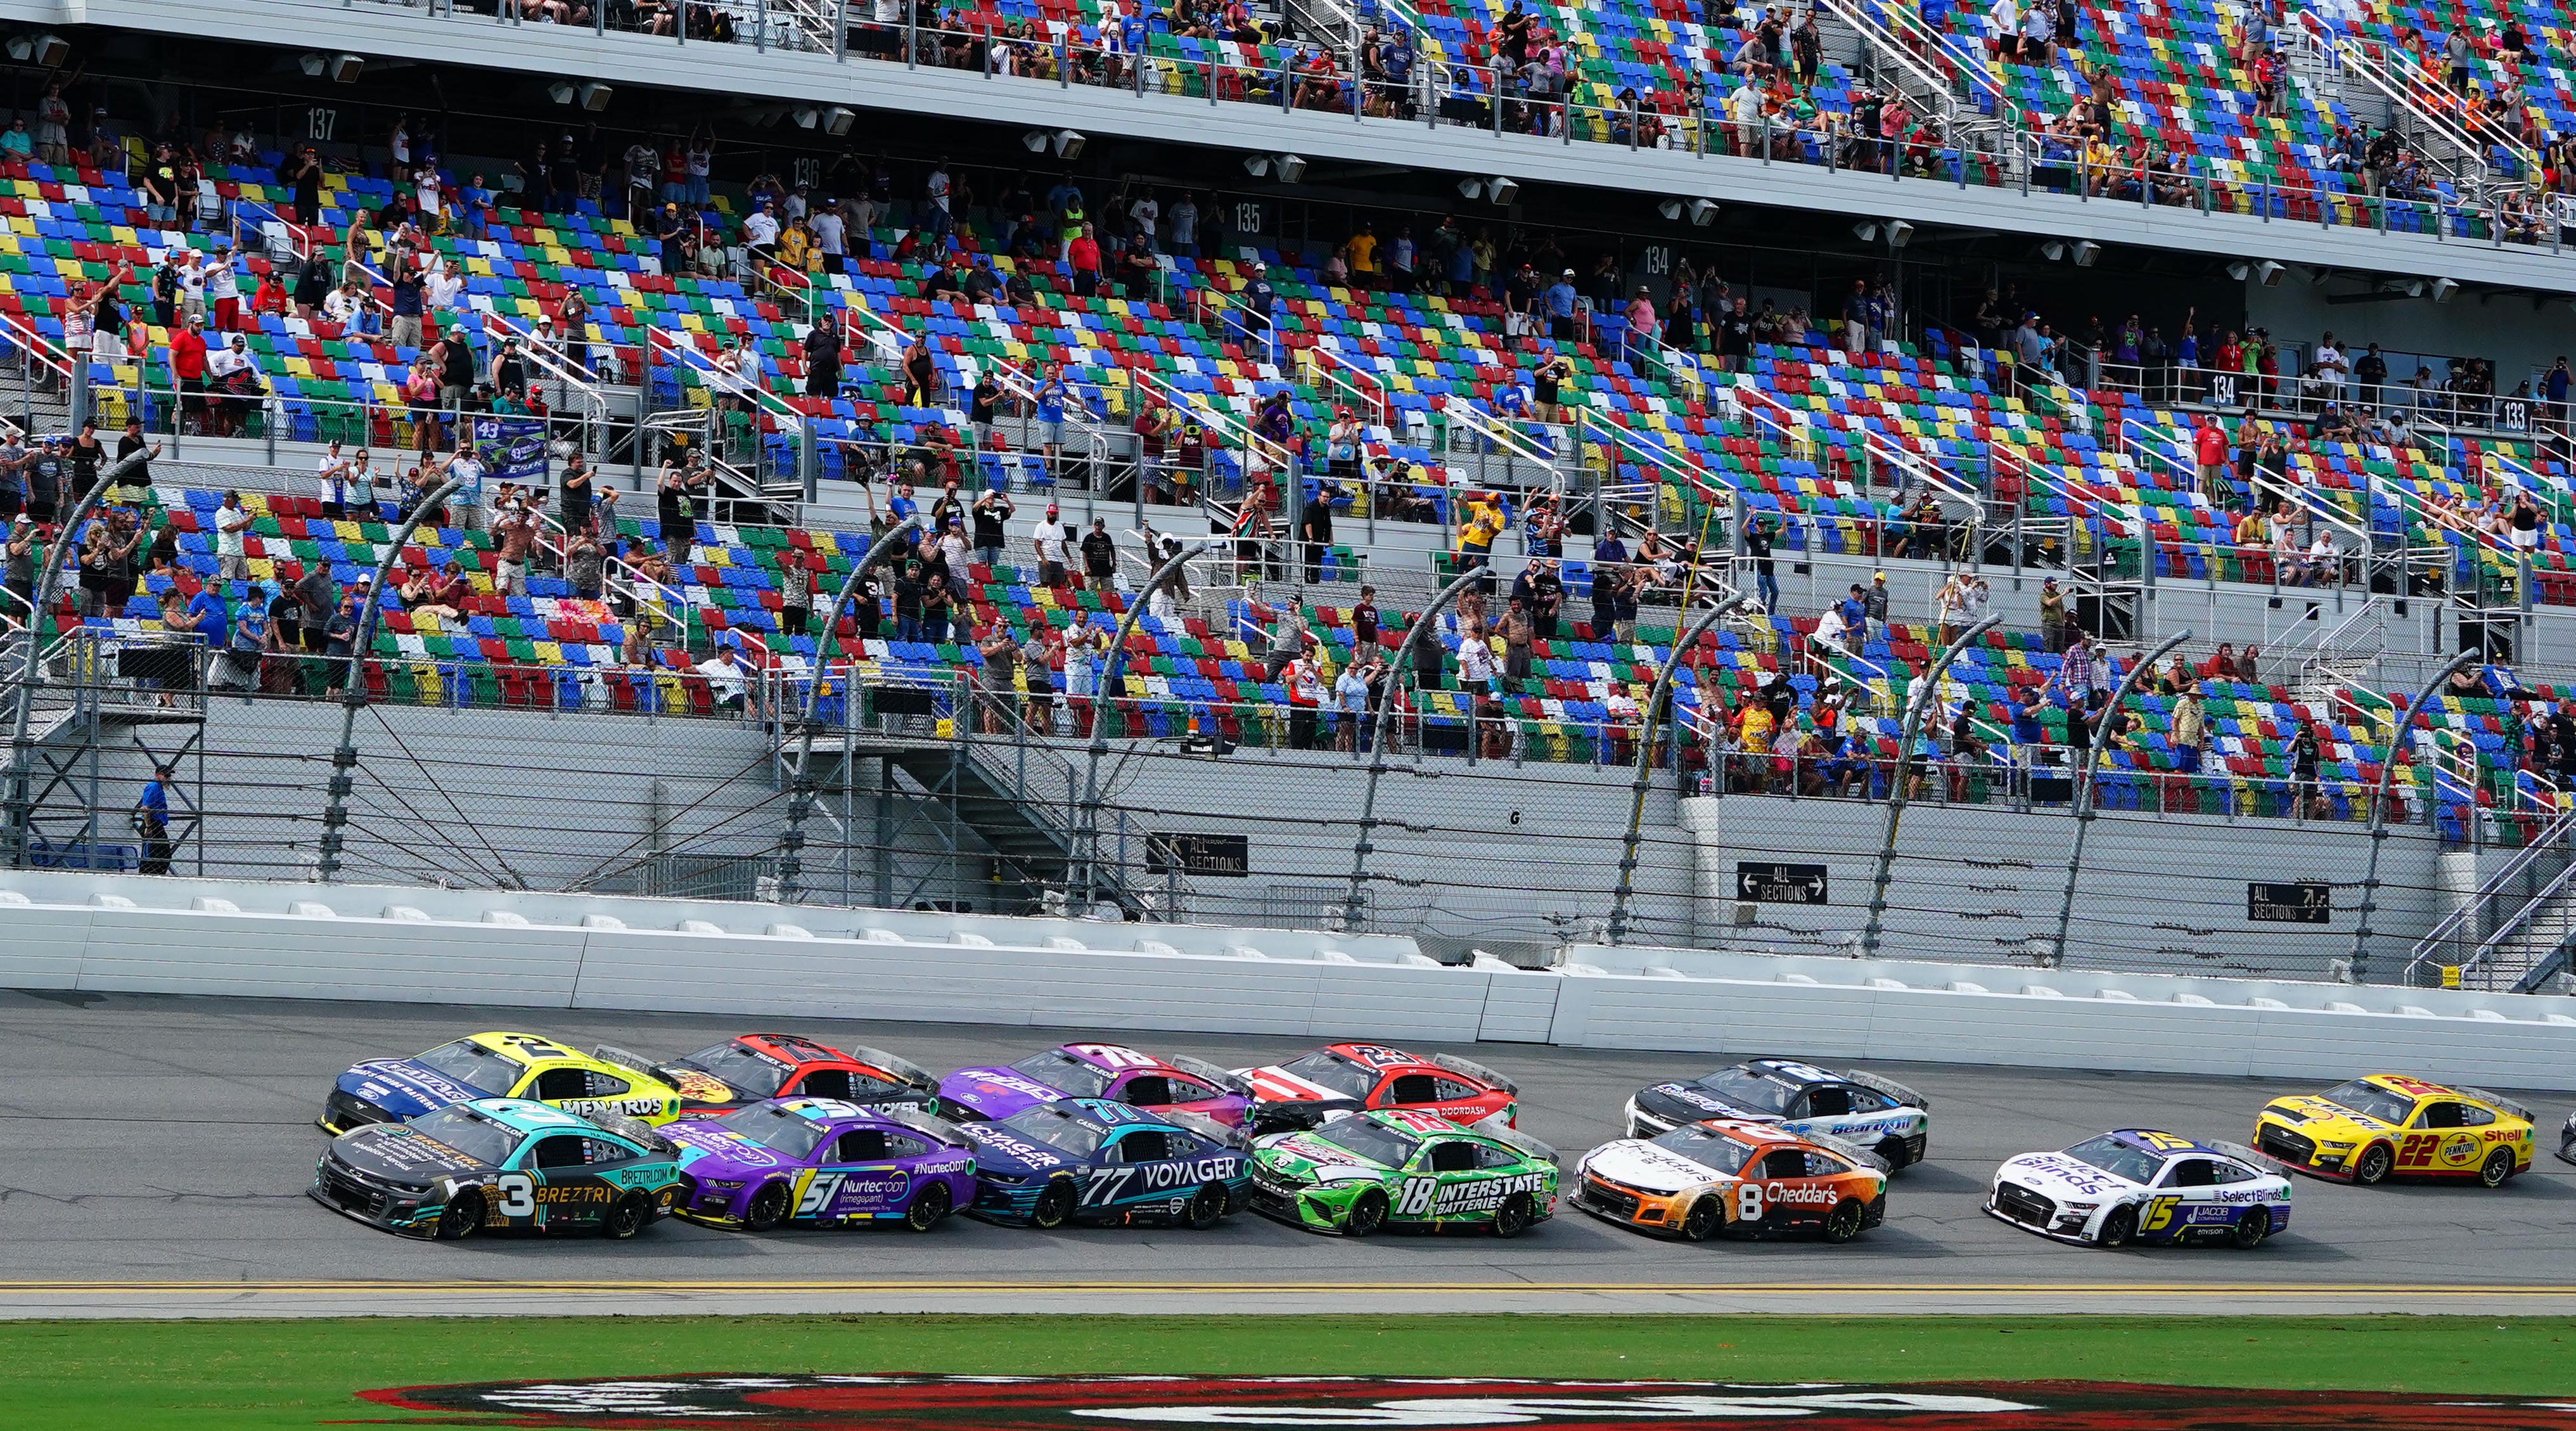 2023 NASCAR Live Race Results USA TODAY, 56% OFF